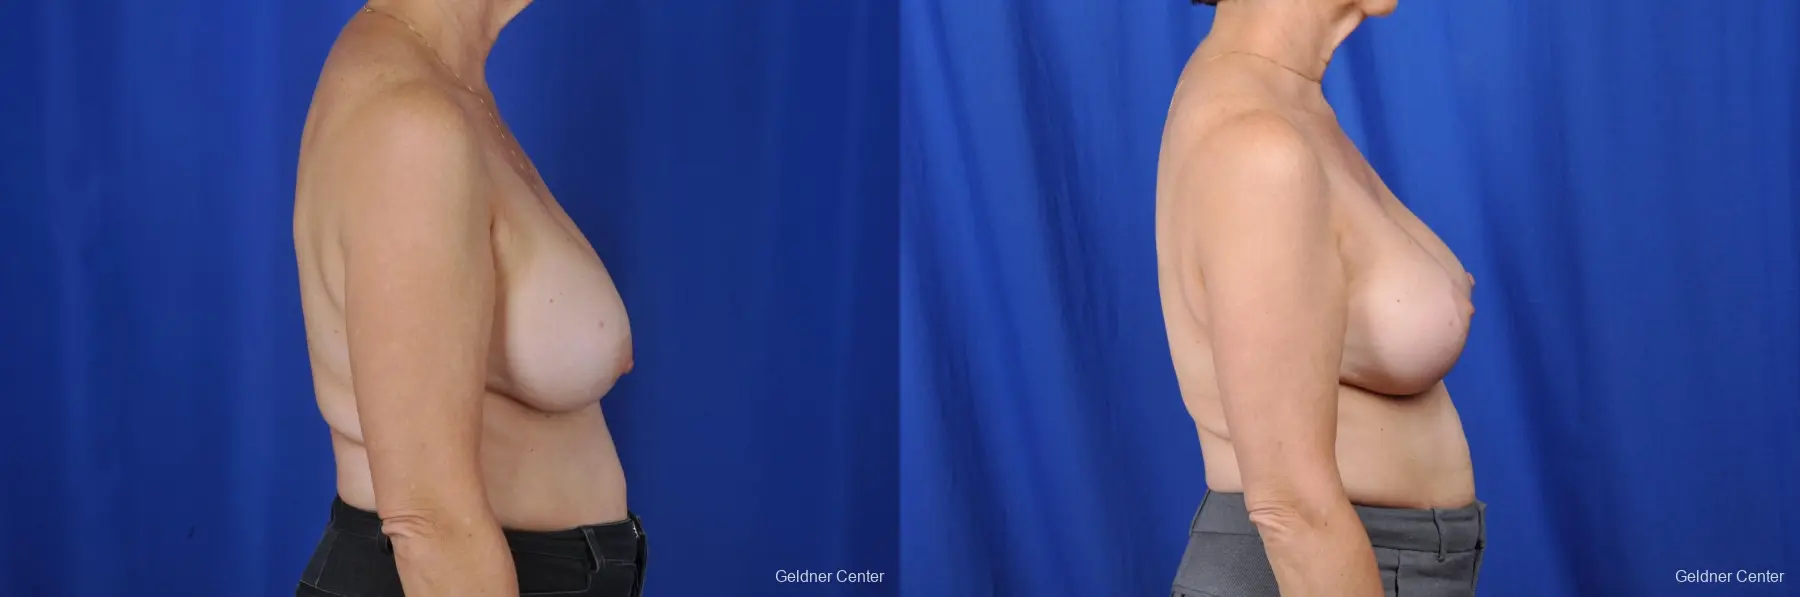 Breast Augmentation Lake Shore Dr, Chicago 2057 - Before and After 2